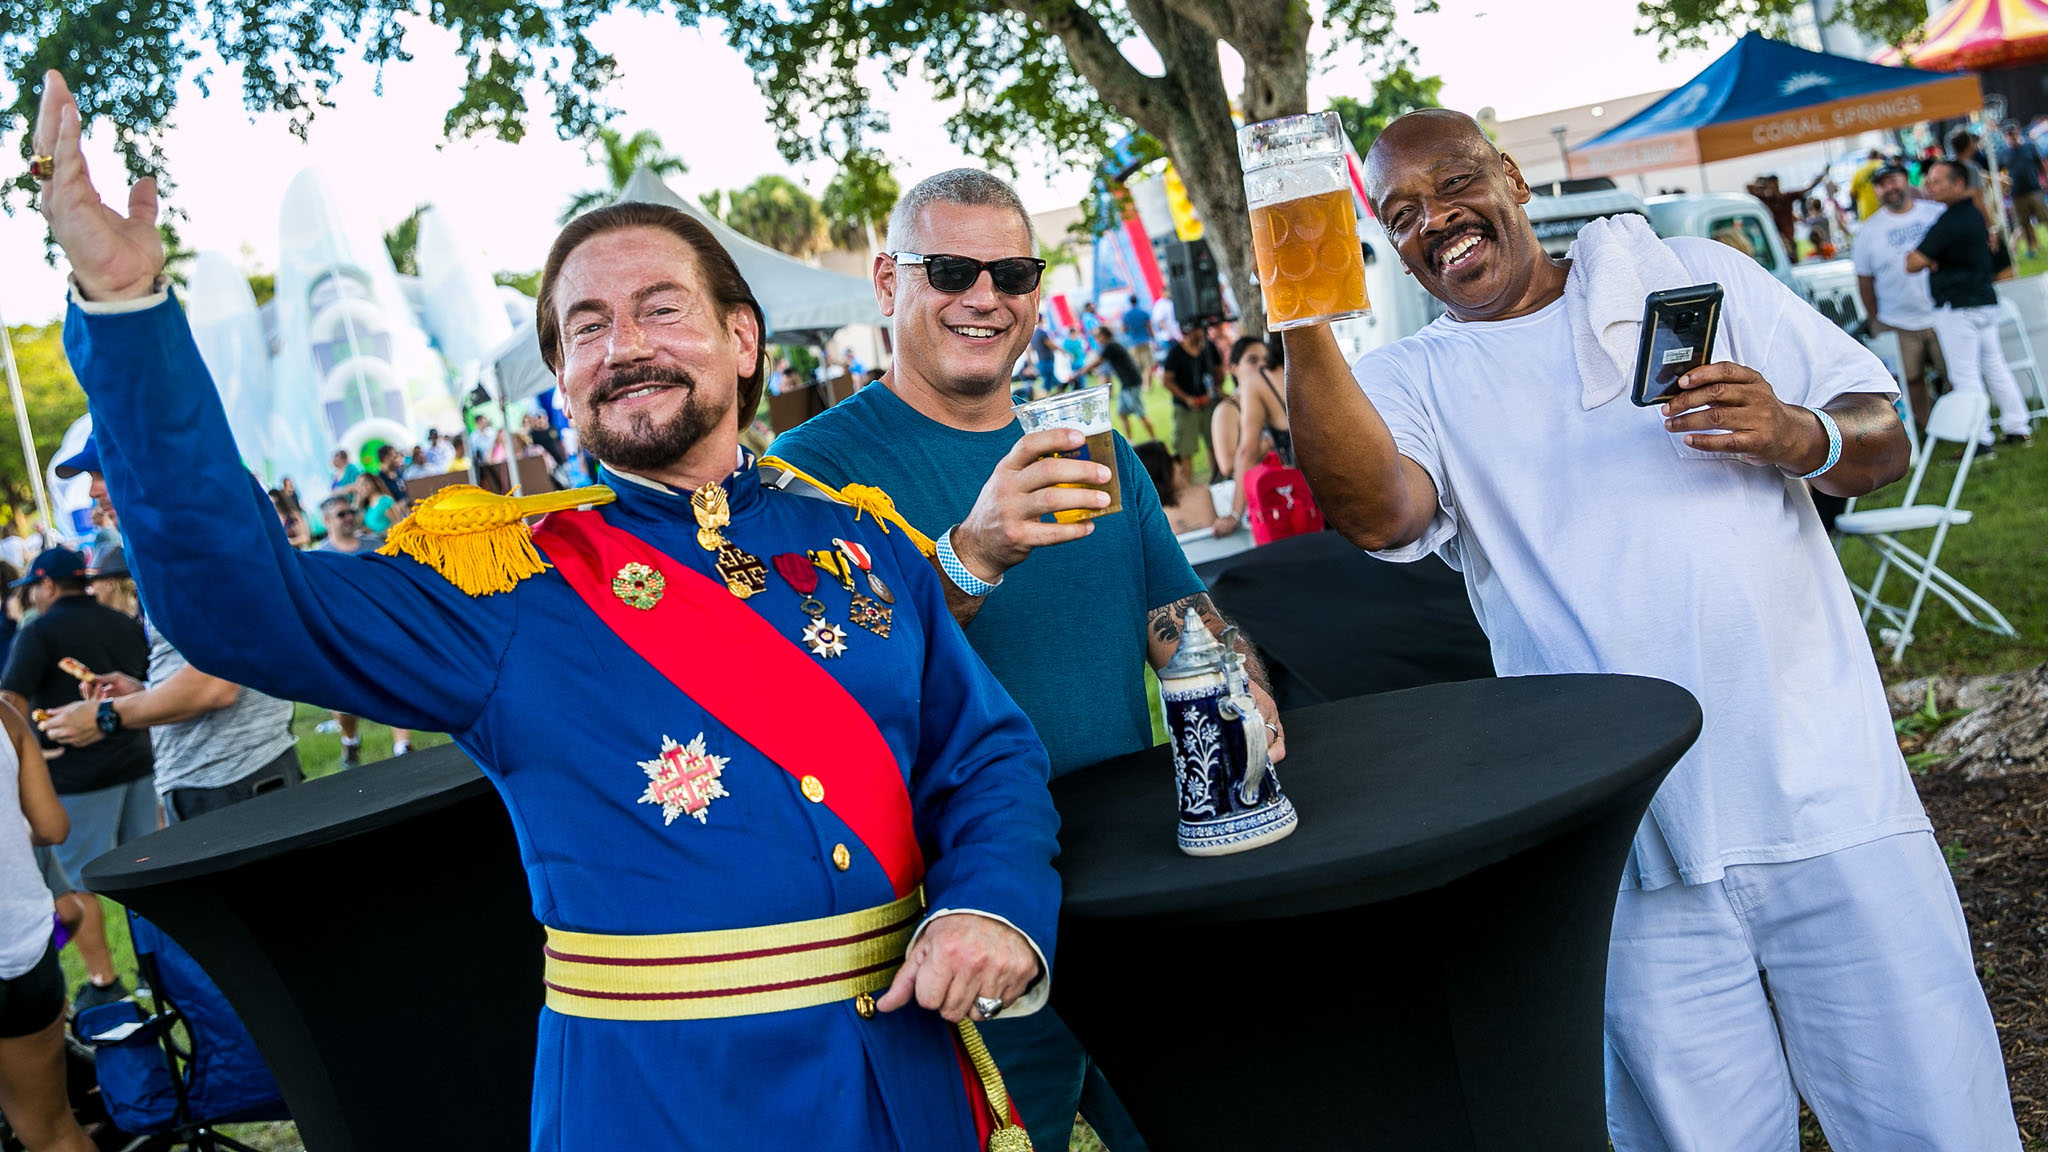 Coral Springs ‘Taps’ into Bavarian Culture with Amazing Oktoberfest Celebration